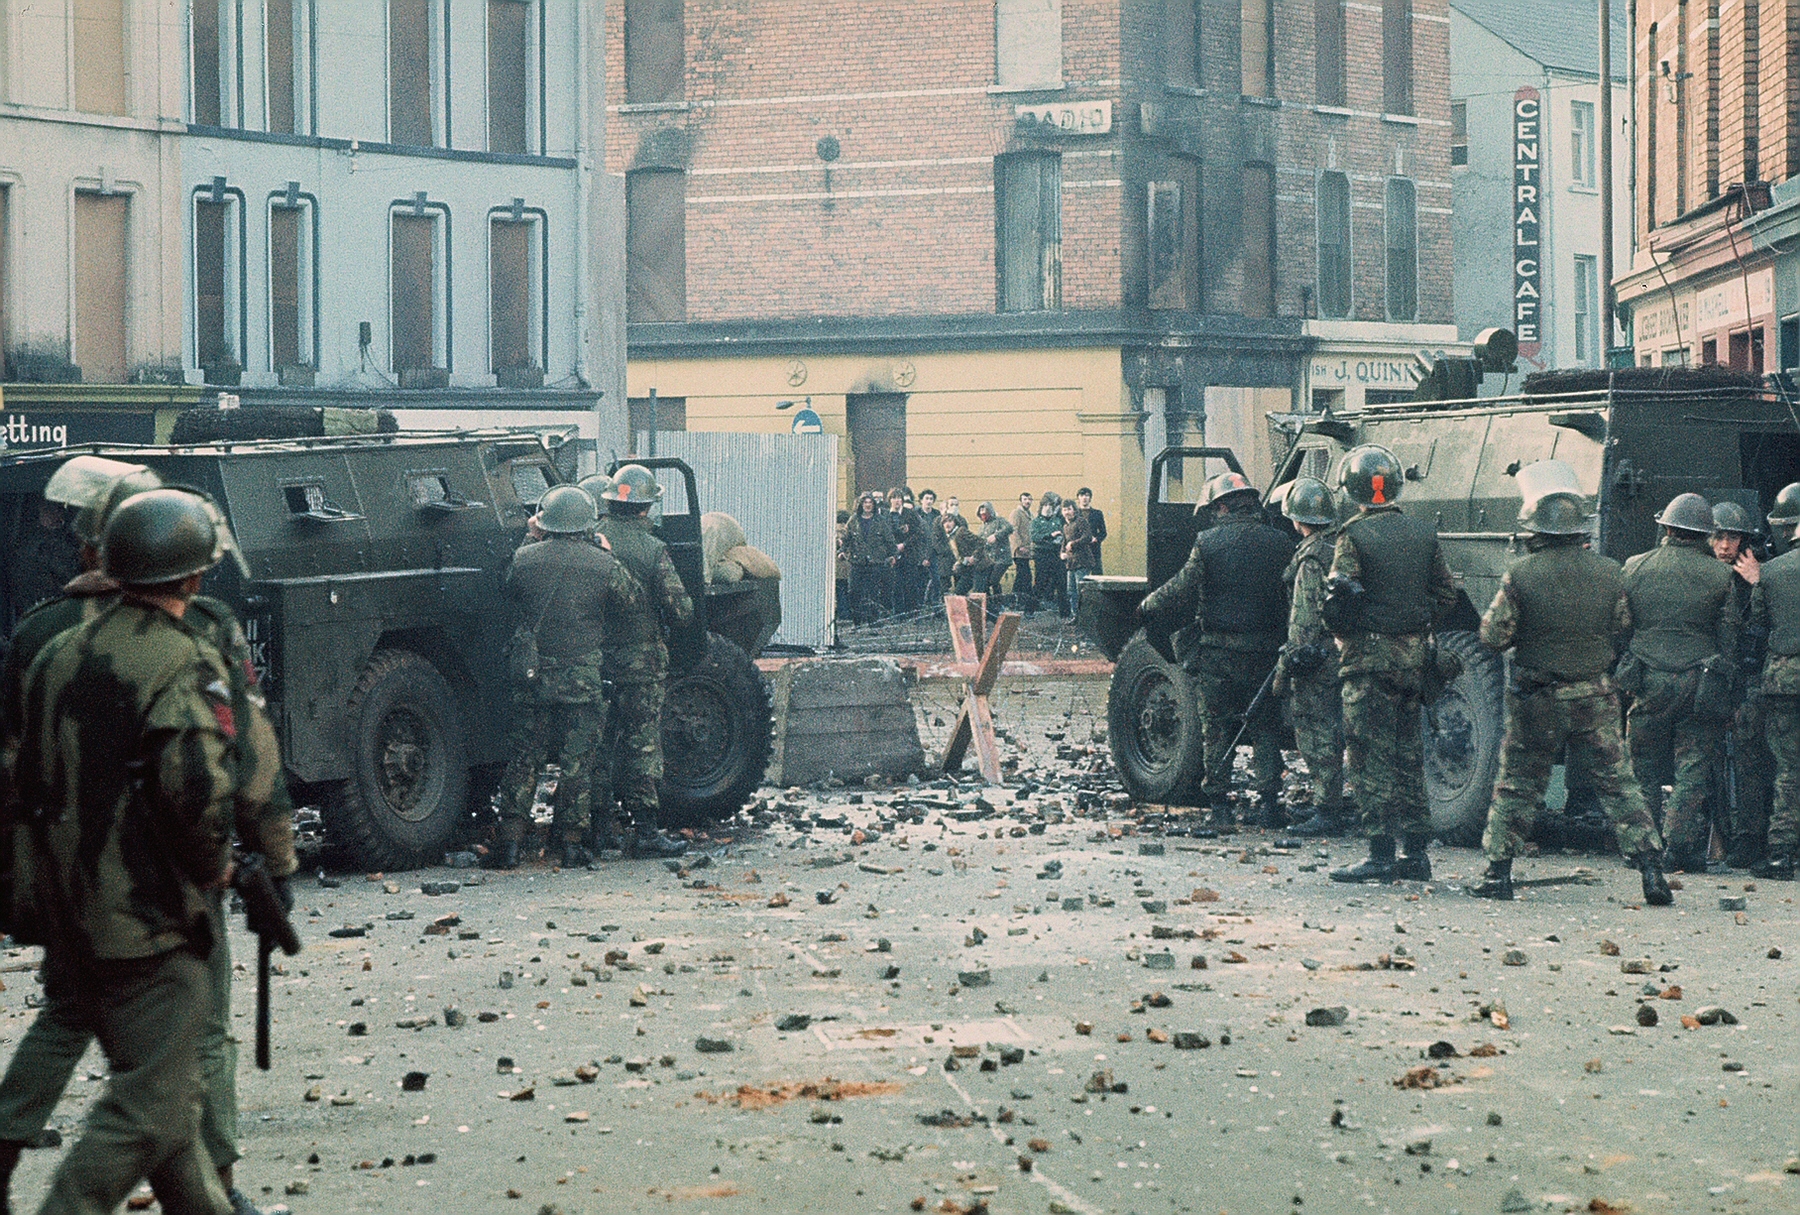 Catholic demonstrators and British troops clash in what would become known as ‘Bloody Sunday’. In response to terrorist attacks on British soldiers and Irish police, the British government flooded the province of Northern Ireland with troops,